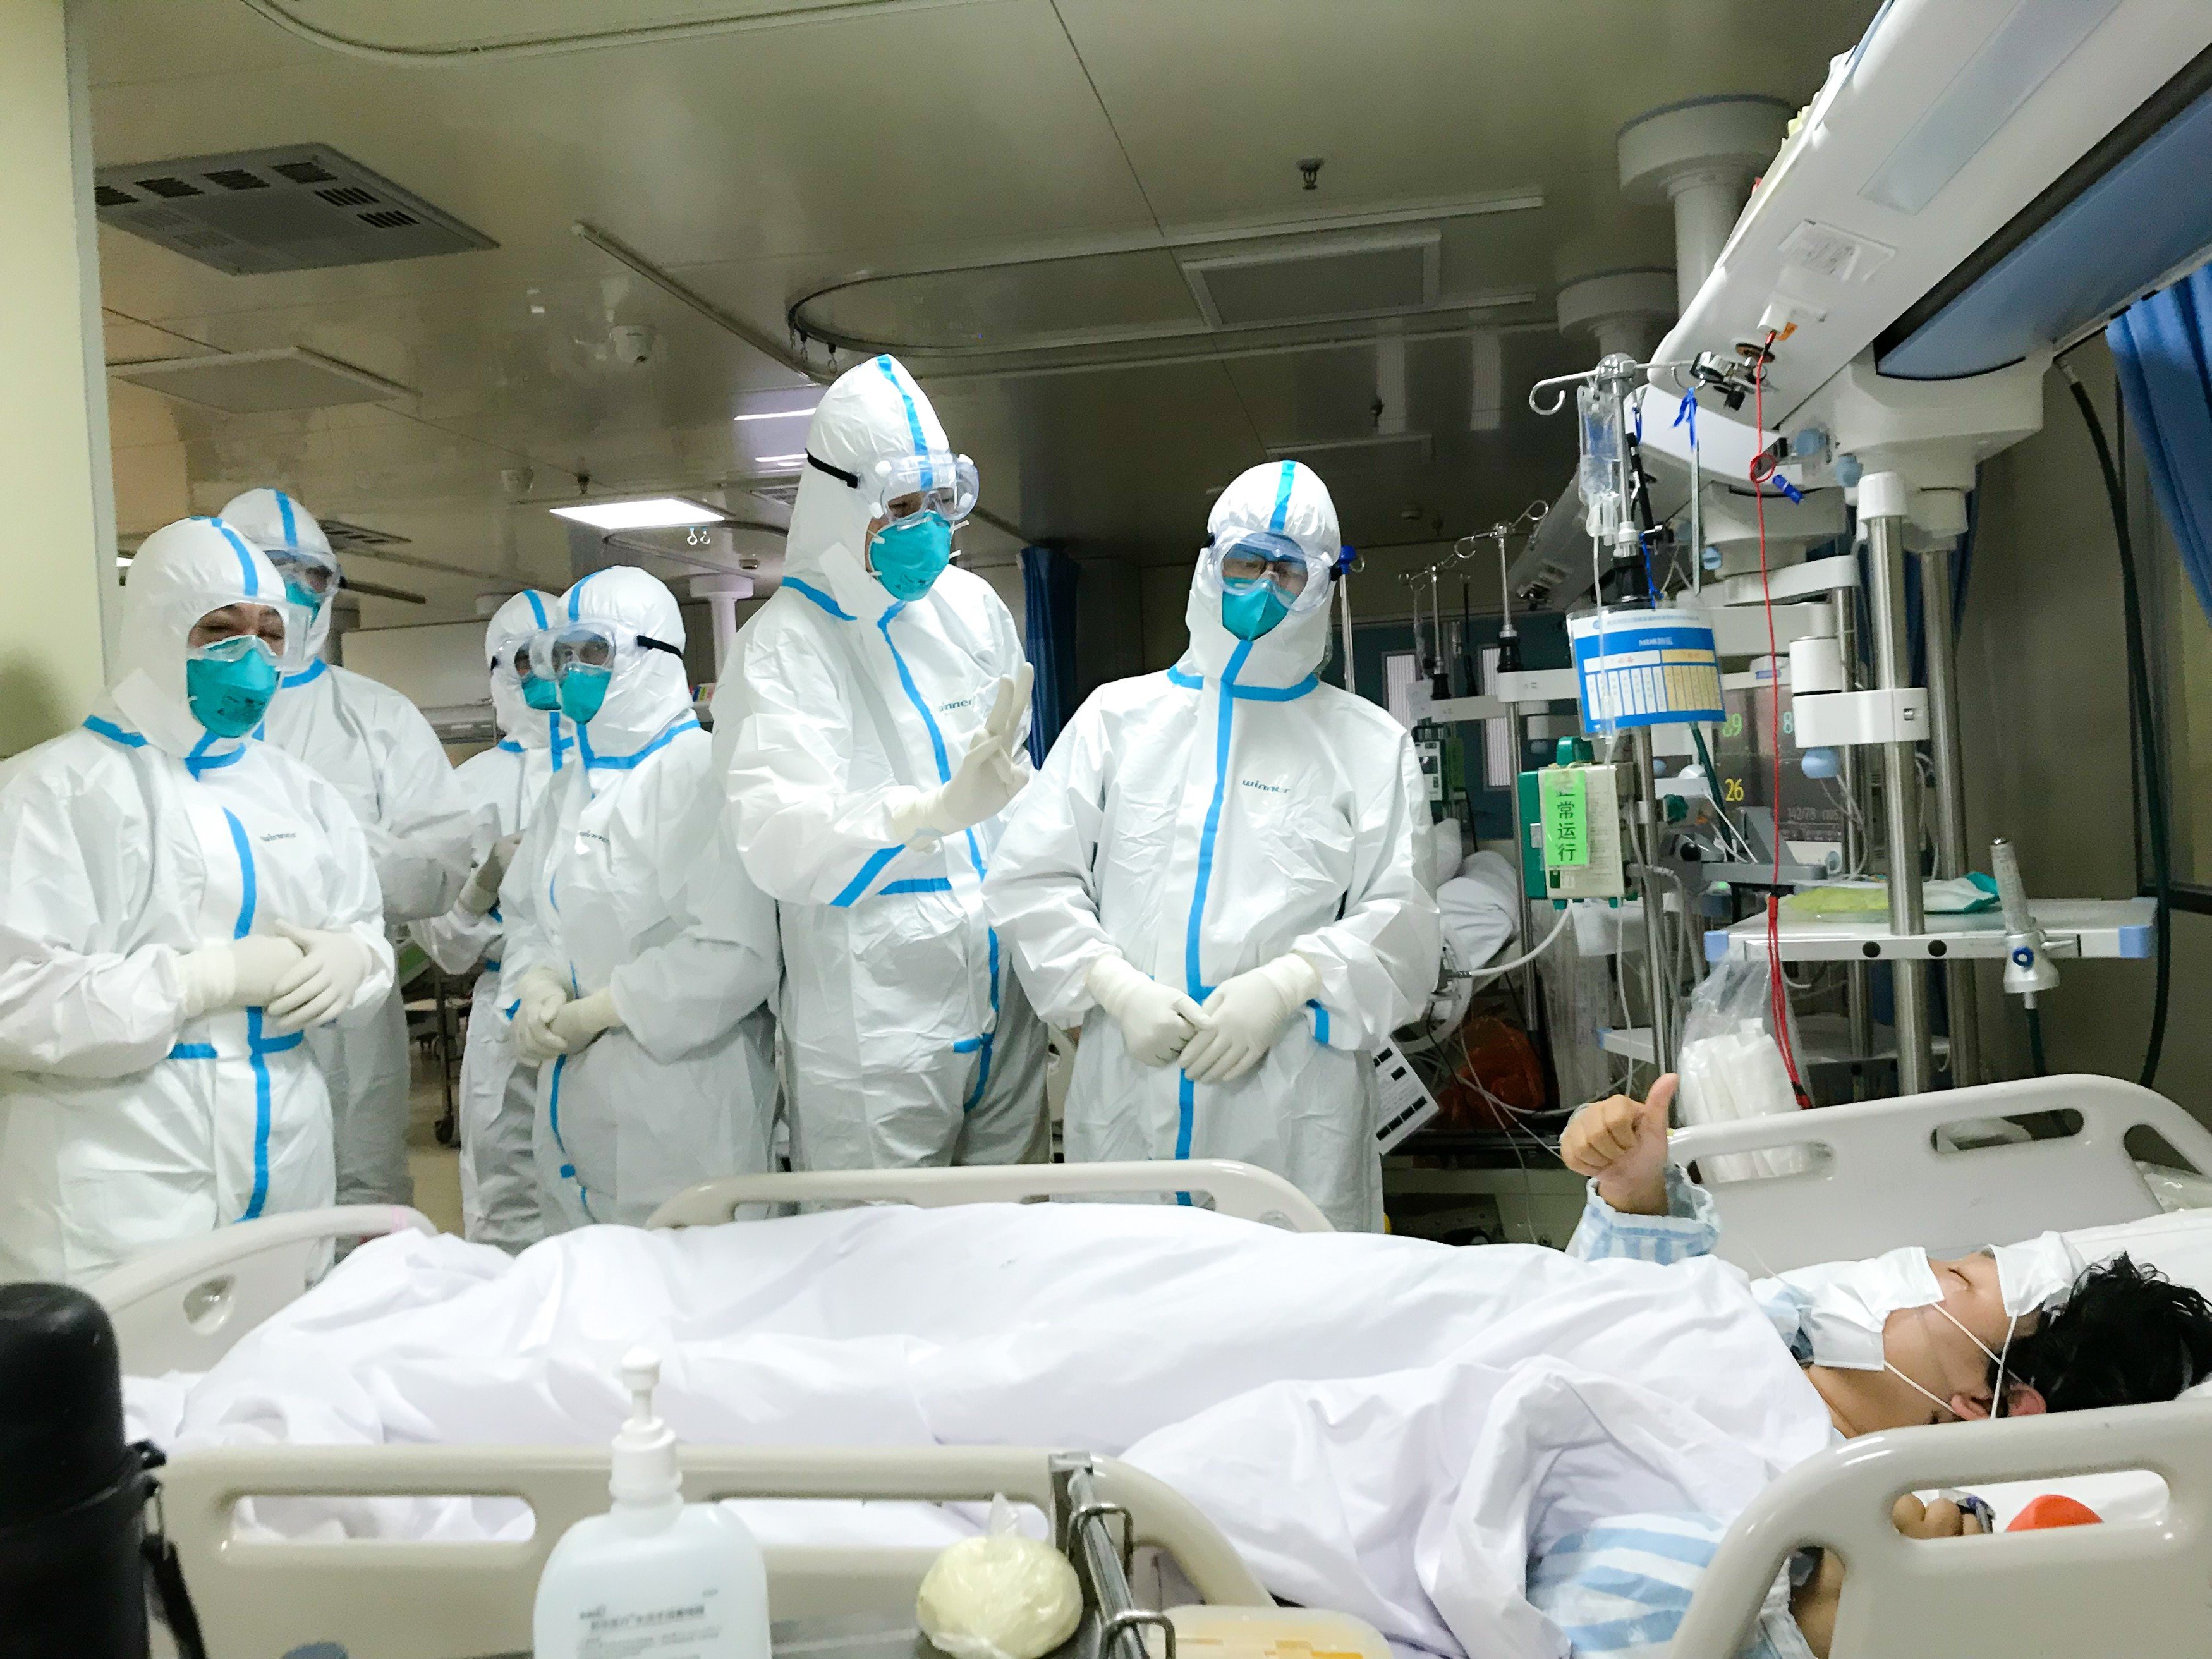 Doctors in Wuhan are working around the clock and against the odds to battle the coronavirus outbreak. Photo: Xinhua